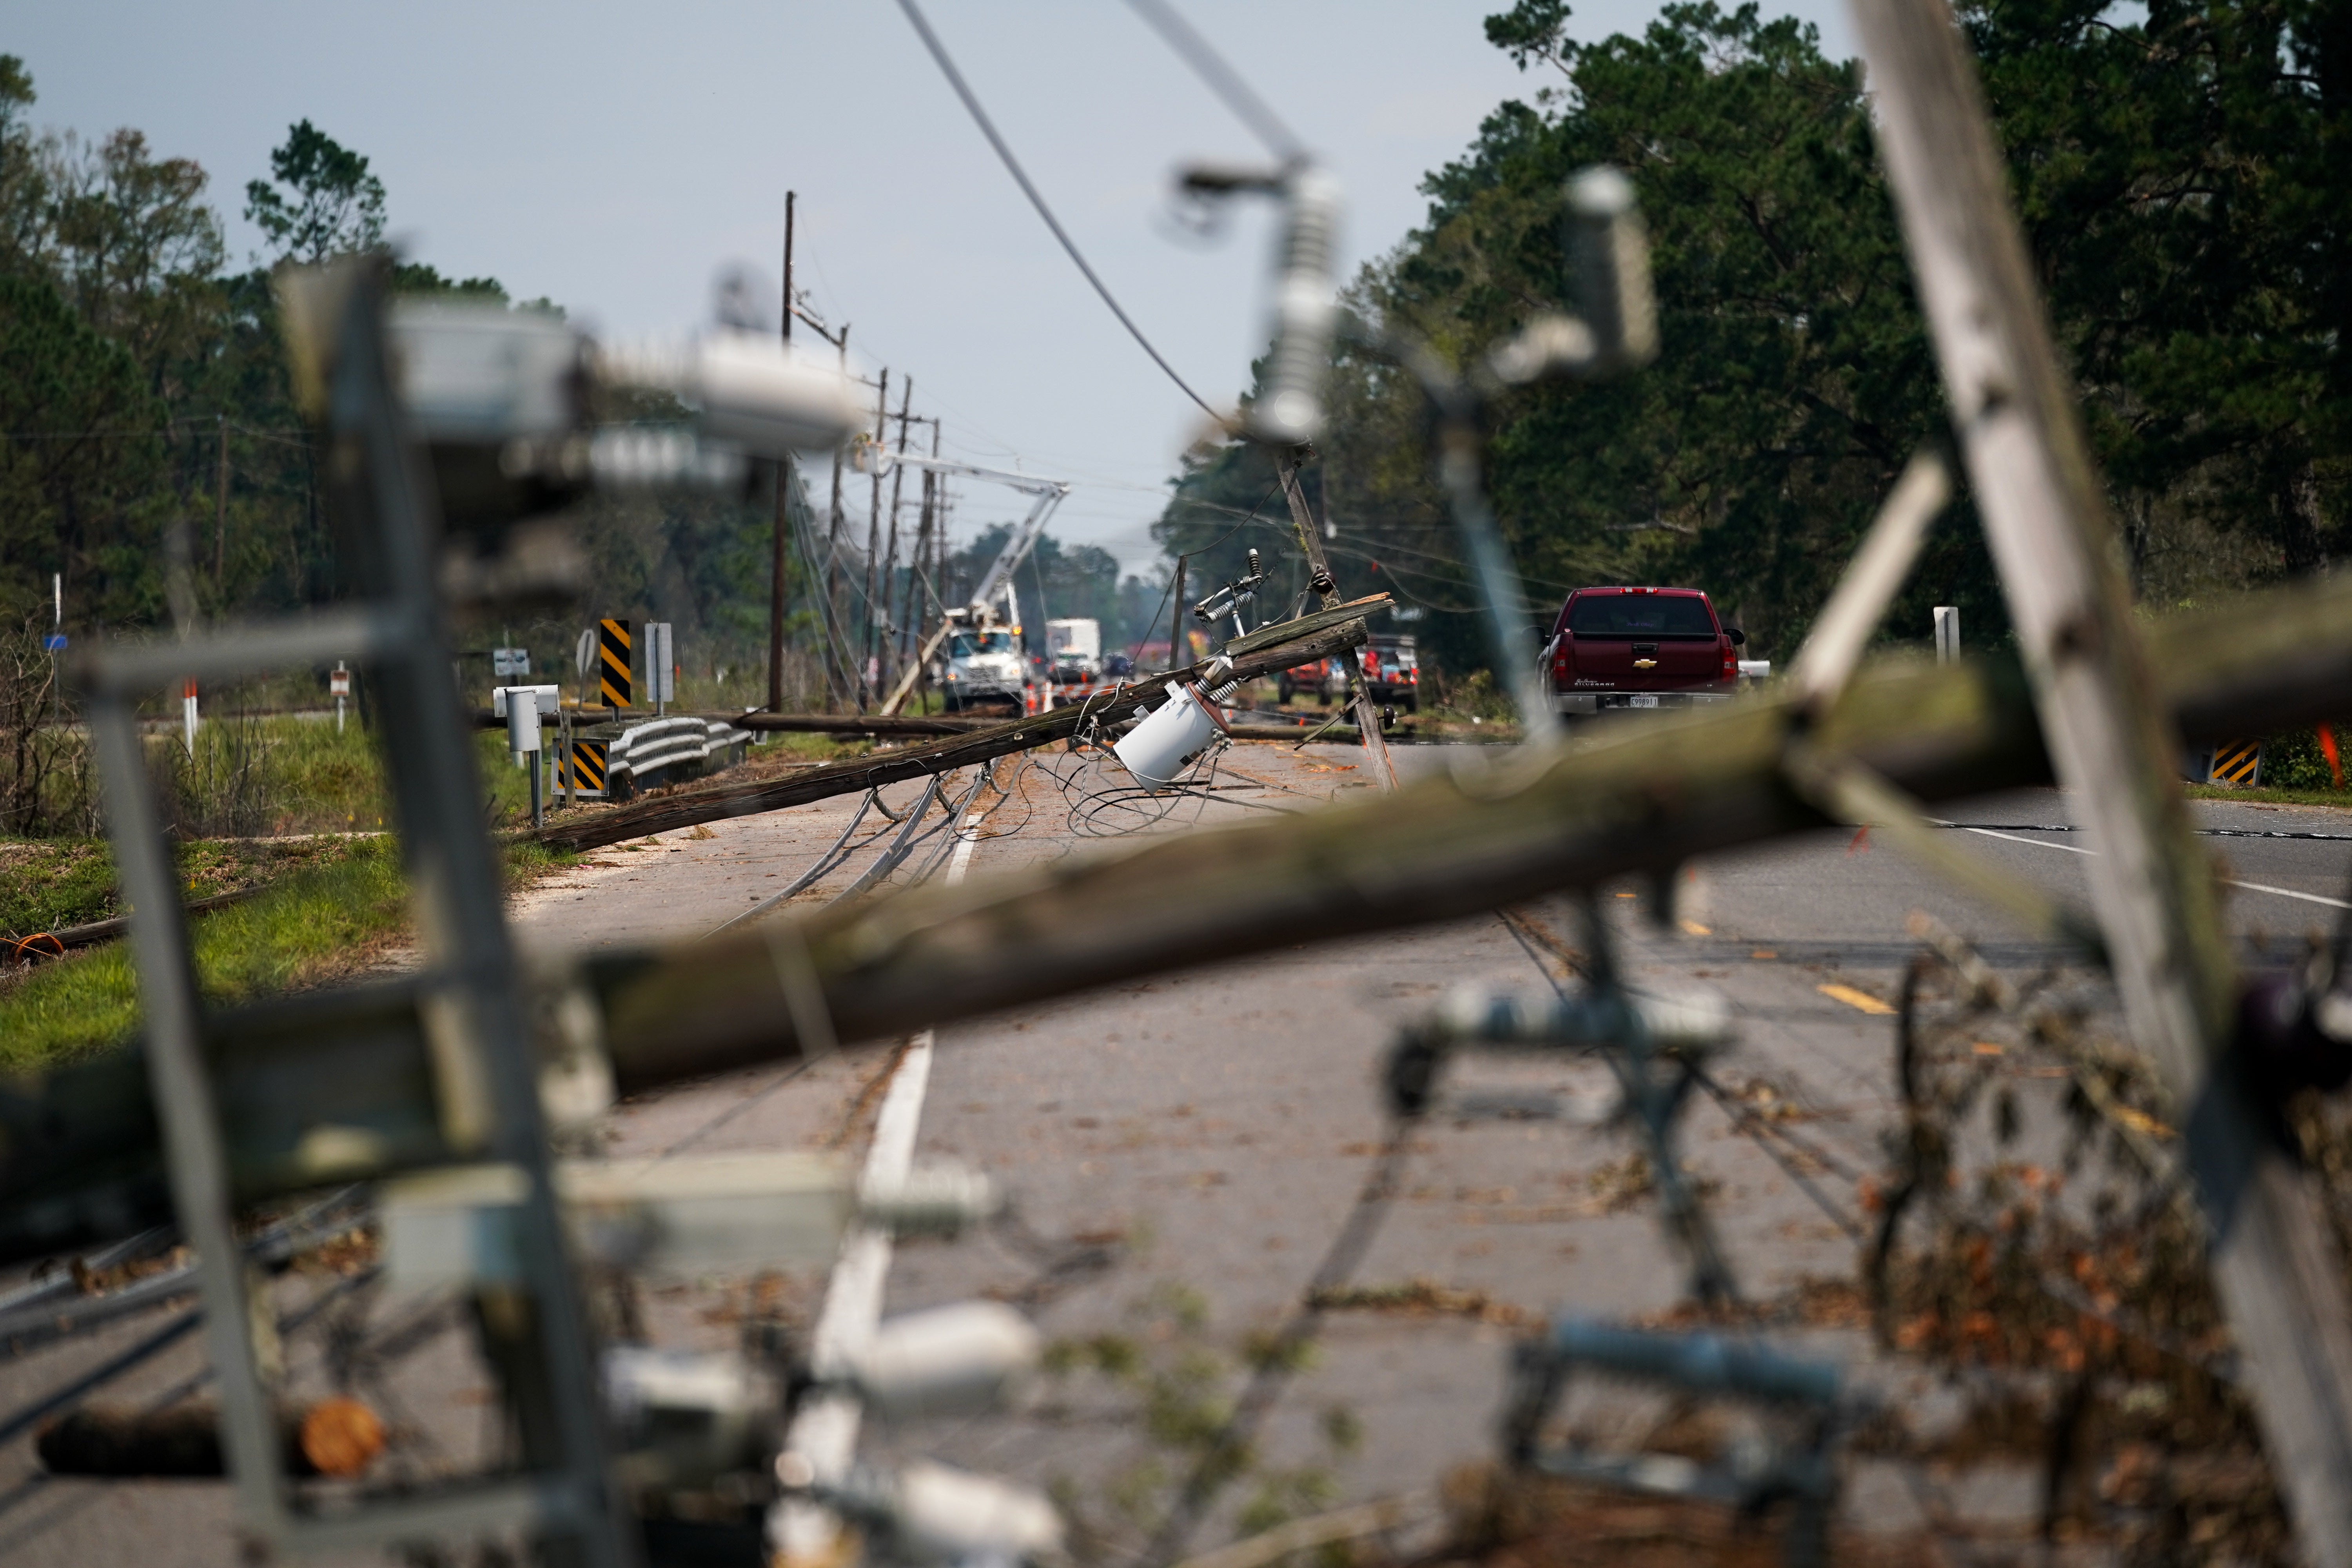 Utility poles and transmission lines collapsed across south Louisiana during Hurricane Ida, stranding thousands of residents without power for days or weeks.